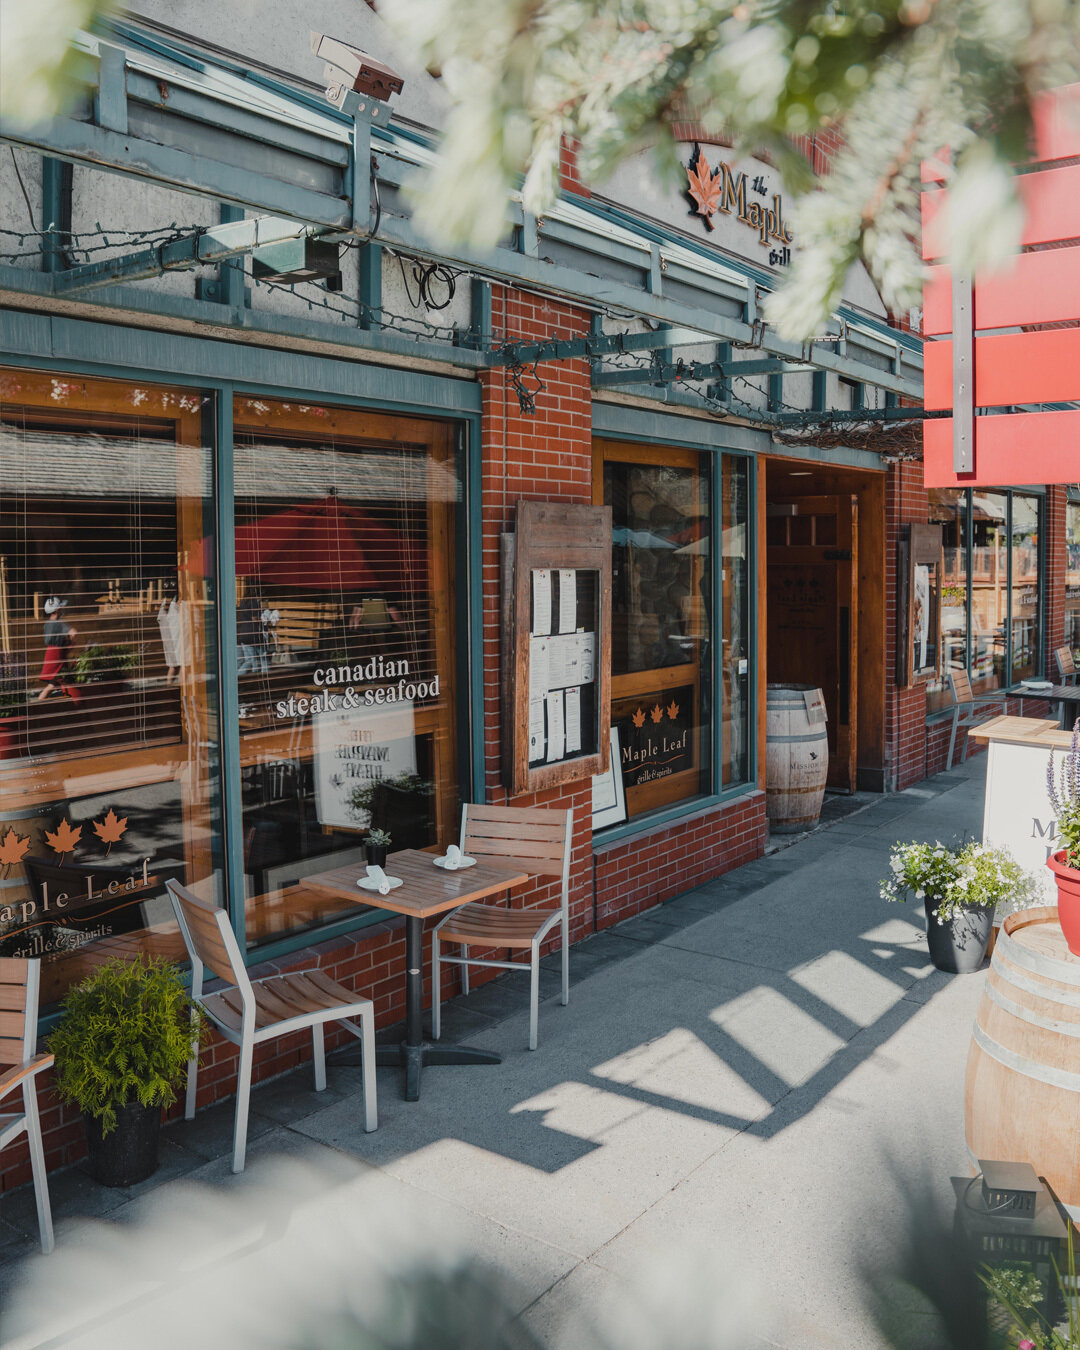 Our patio is set up, all that is missing is you.💕 Dine streetside in the heart of Banff.

#banff #mybanff #themapleleaf #mapleleaf #patio #patioseason